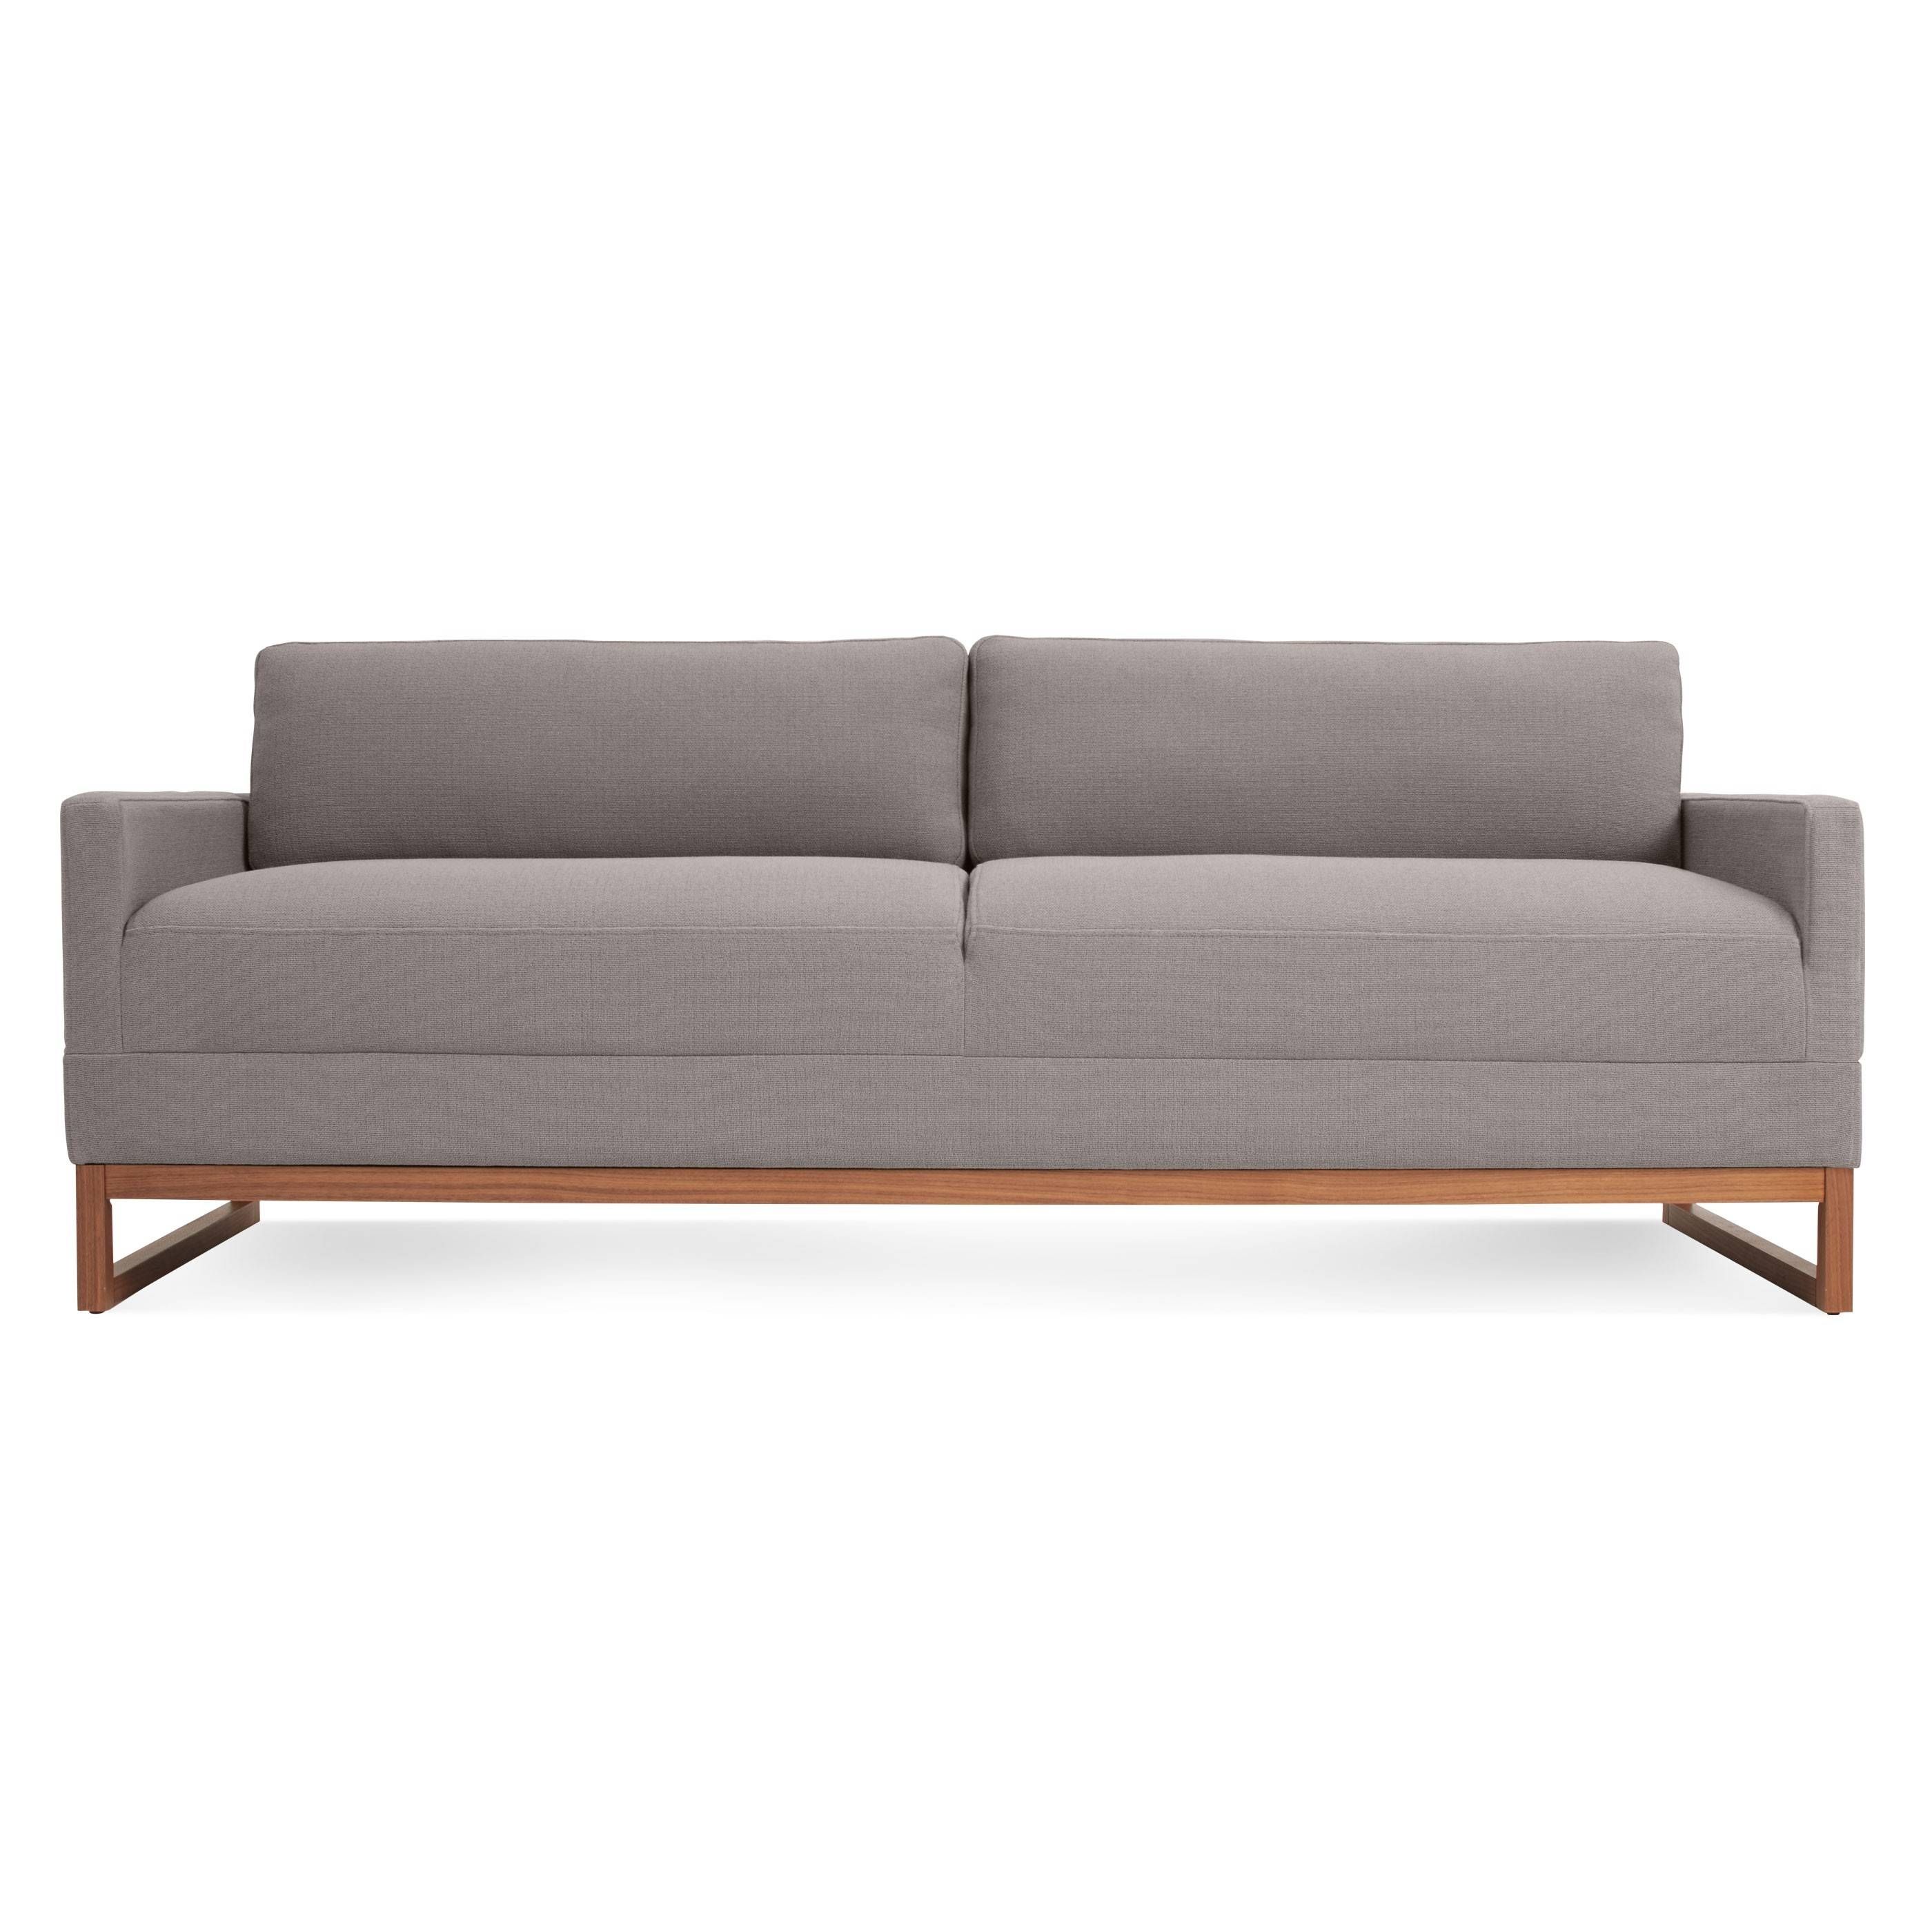 Furniture: Comfortable Tempurpedic Sleeper Sofa For Relax Your With Regard To King Size Sleeper Sofa Sectional (View 8 of 30)